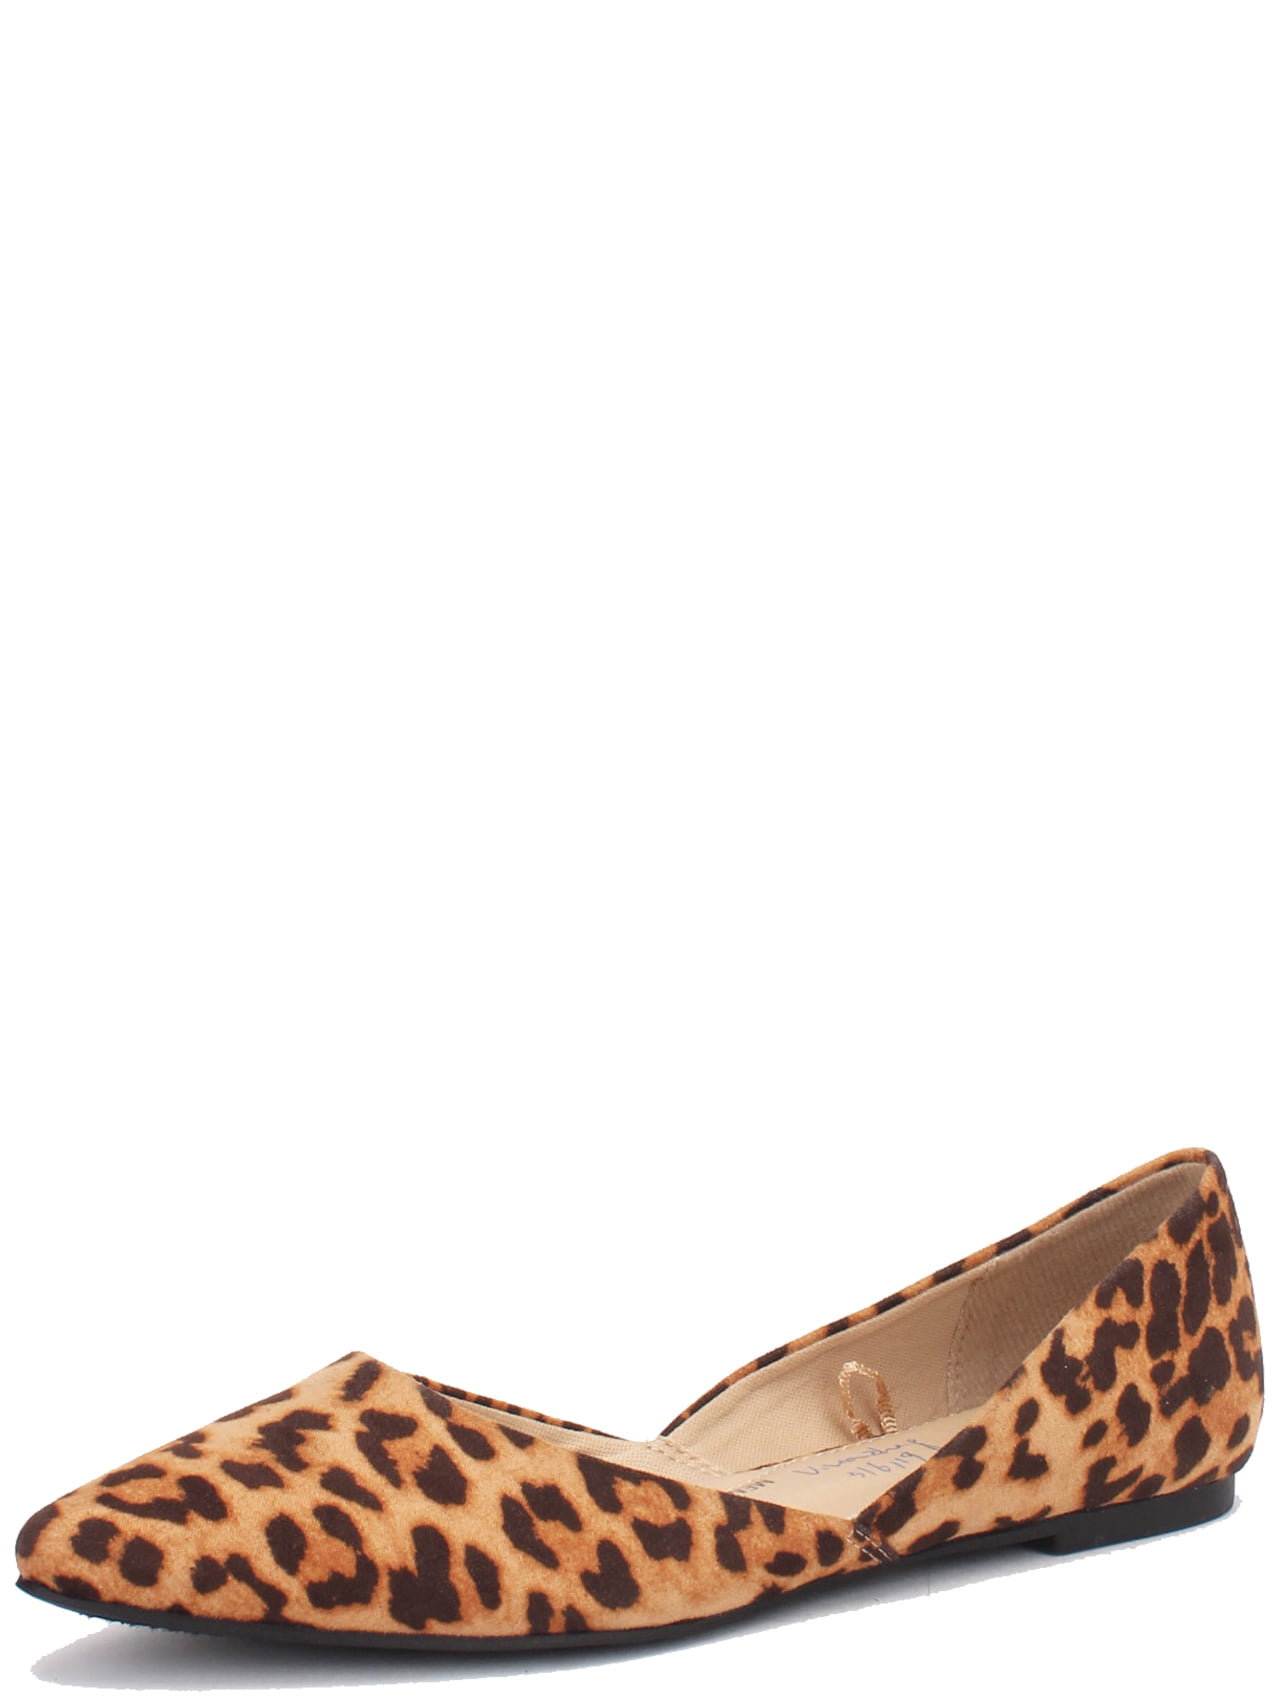 Time and Tru Women Flats Shoes Casual Leopard Animal Print Wide